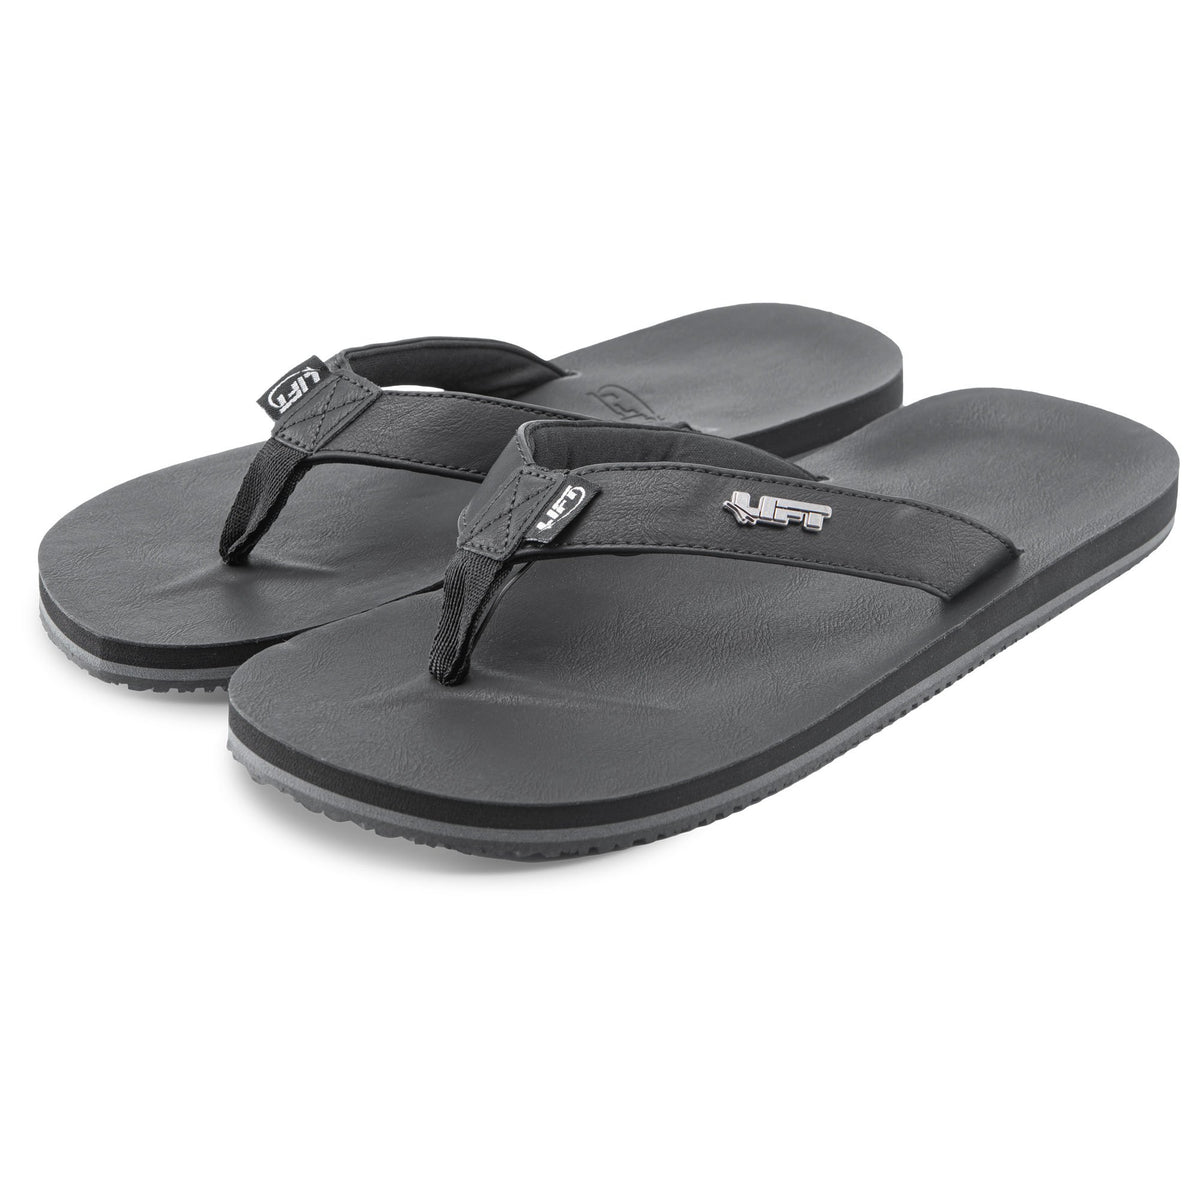 LIFT Safety Sandals | LIFT Safety